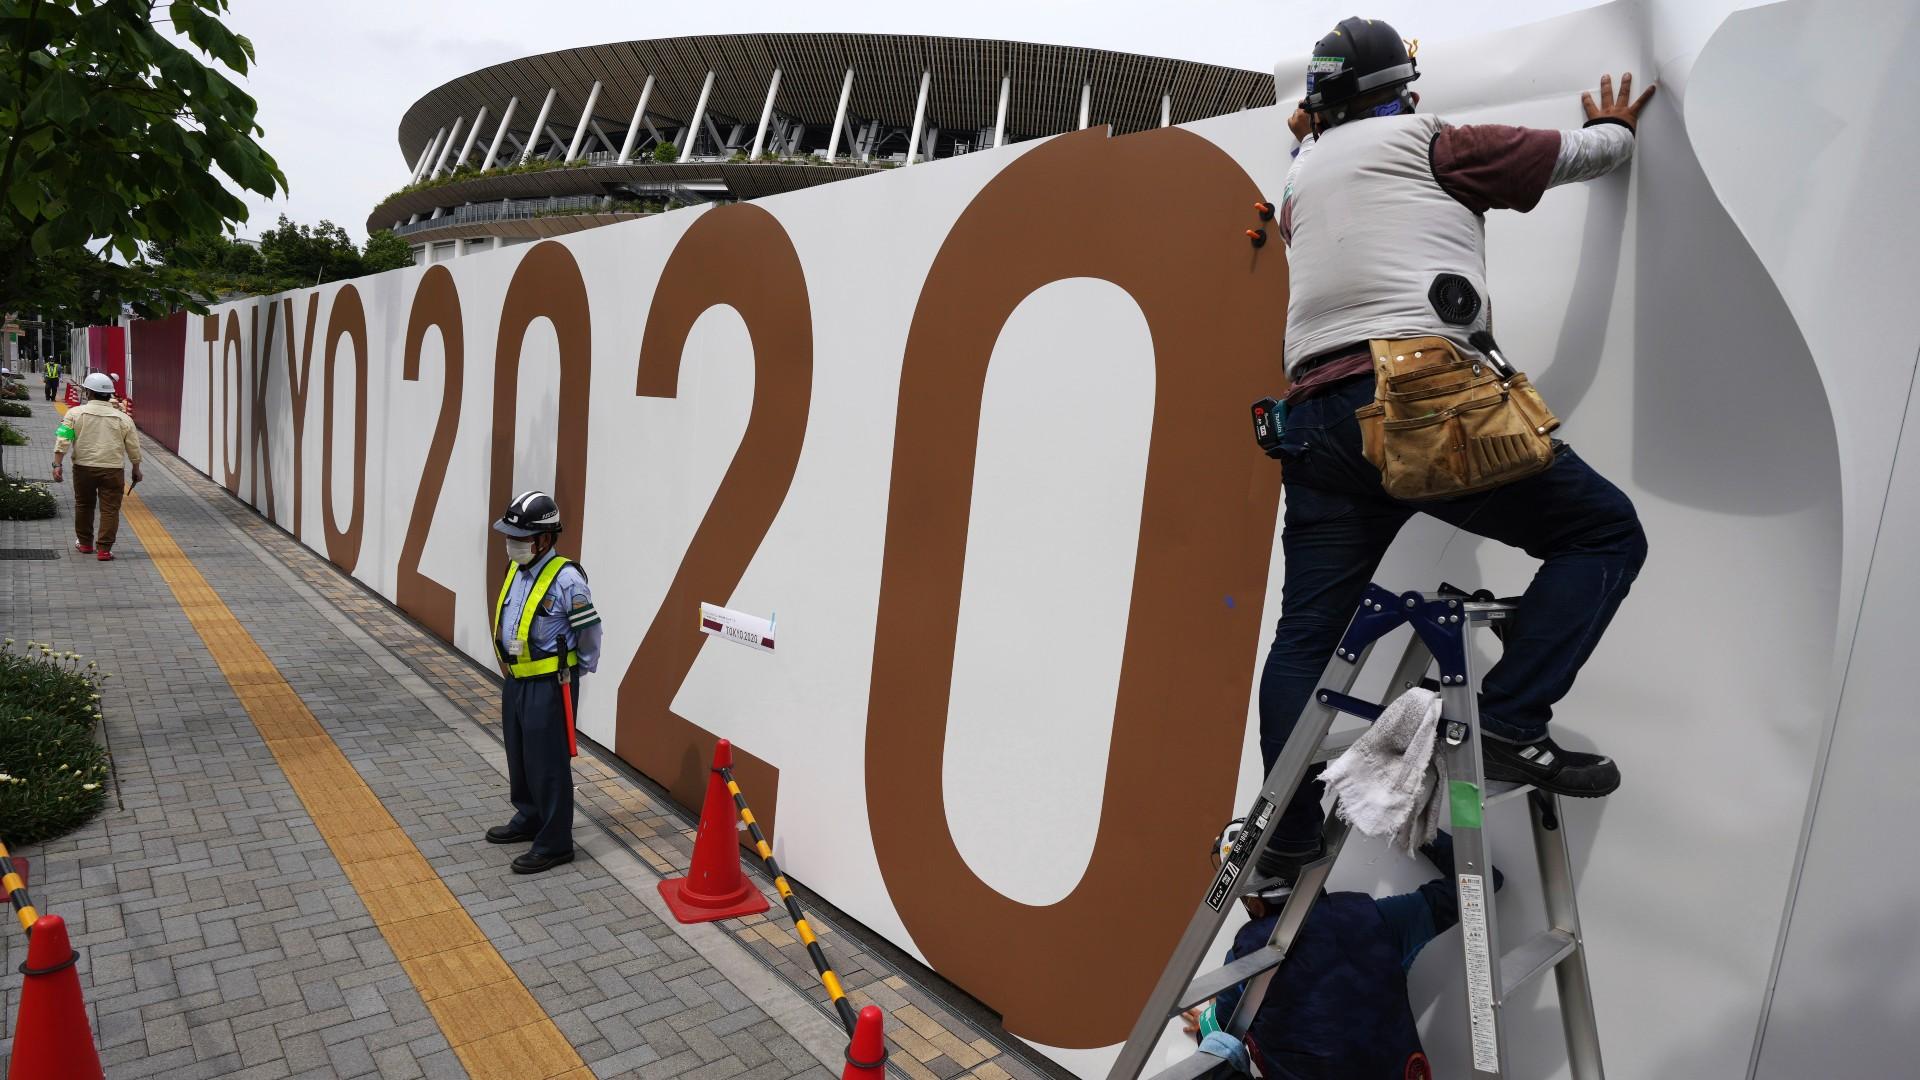 Workers paste the overlay on the wall of the National Stadium, where opening ceremony and many other events are scheduled for the postponed Tokyo 2020 Olympics, Wednesday, June 2, 2021, in Tokyo. (AP Photo / Eugene Hoshiko)